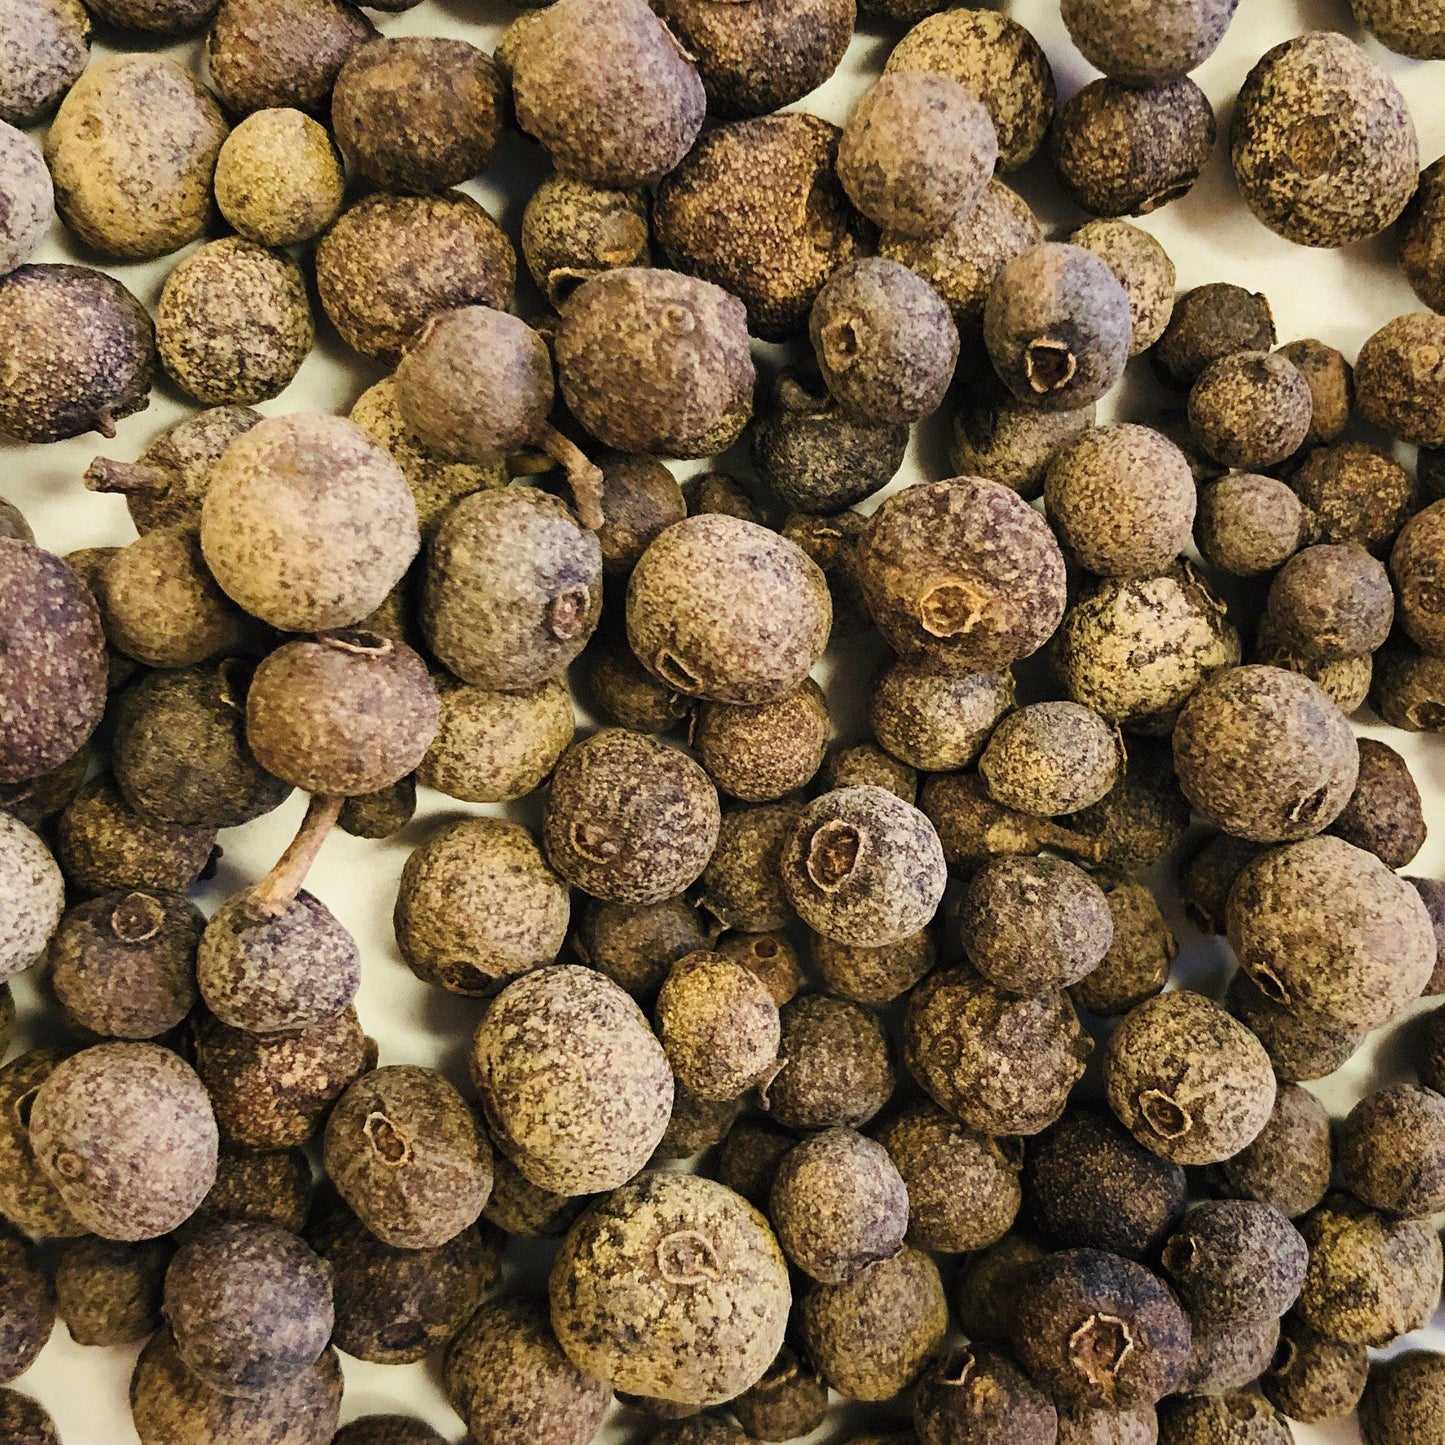 Allspice Whole Organic by the oz.